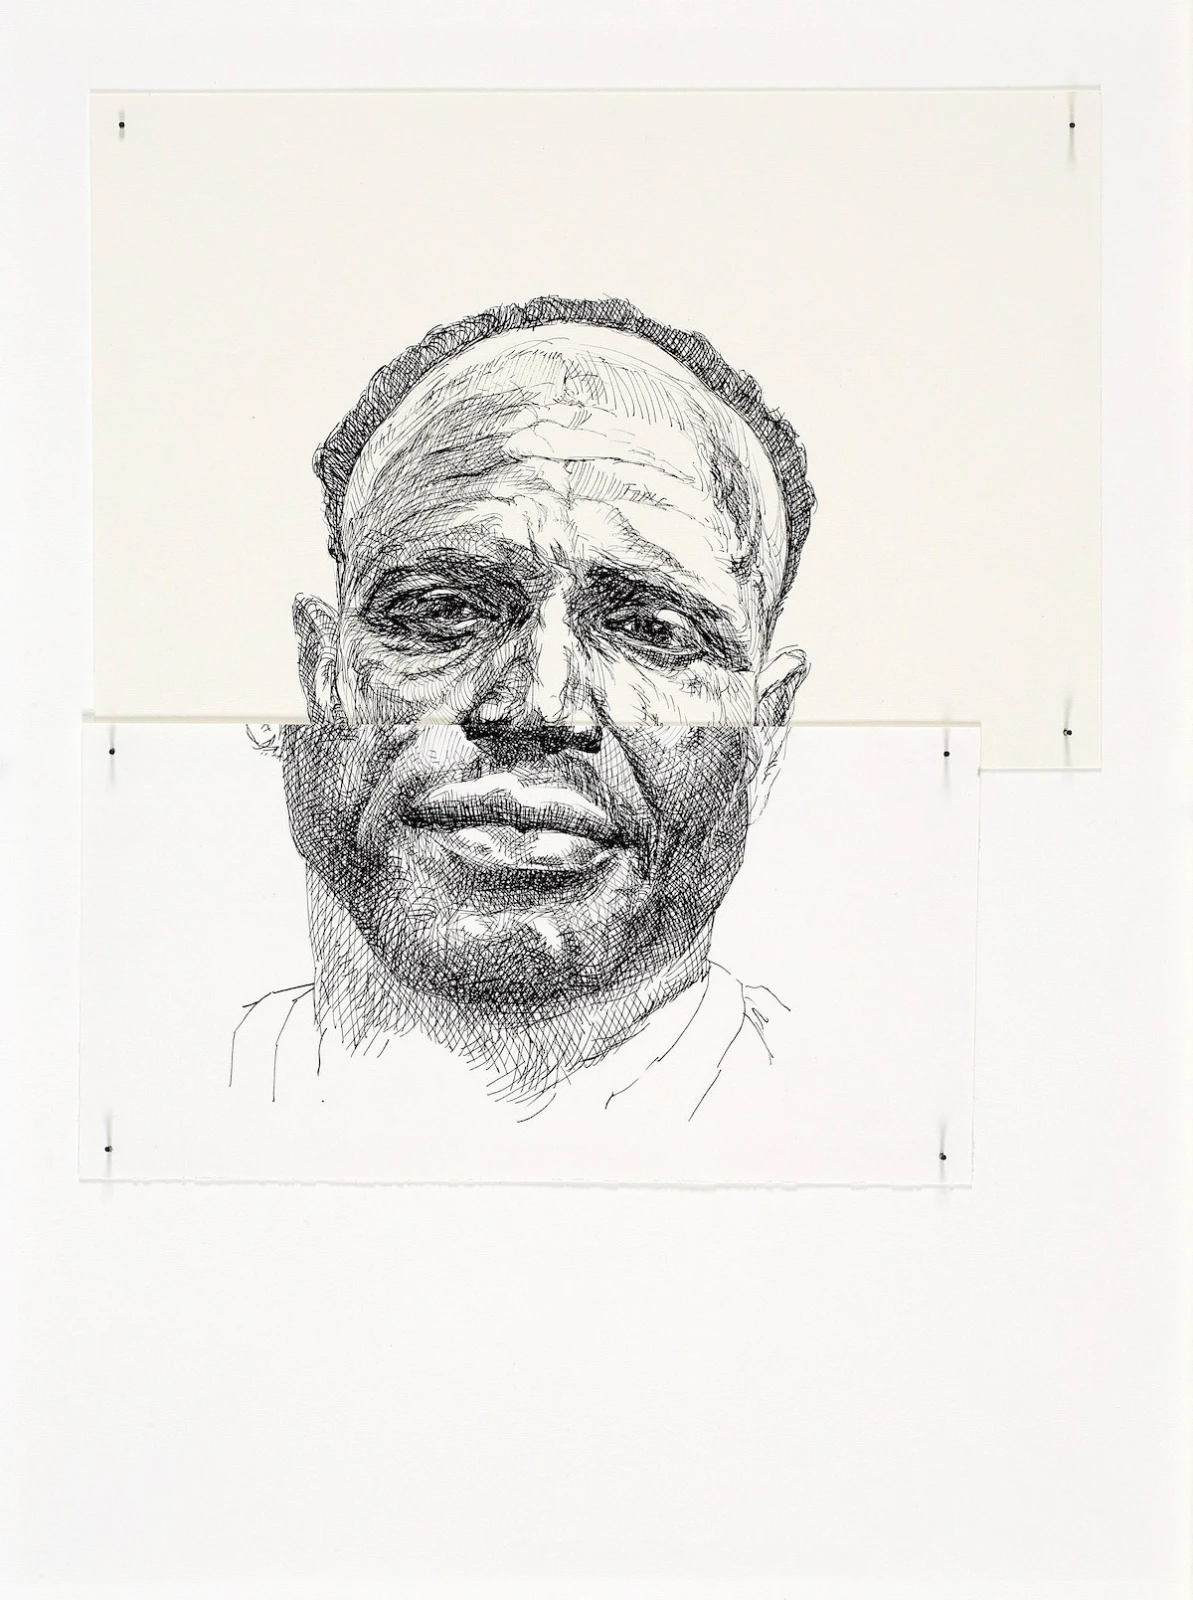 About the Artwork Nidhal Chamekh Nos Visages No. Ii, 2019 Ink on Paper 29,5h X 21w Cm  by Nidhal Chamekh